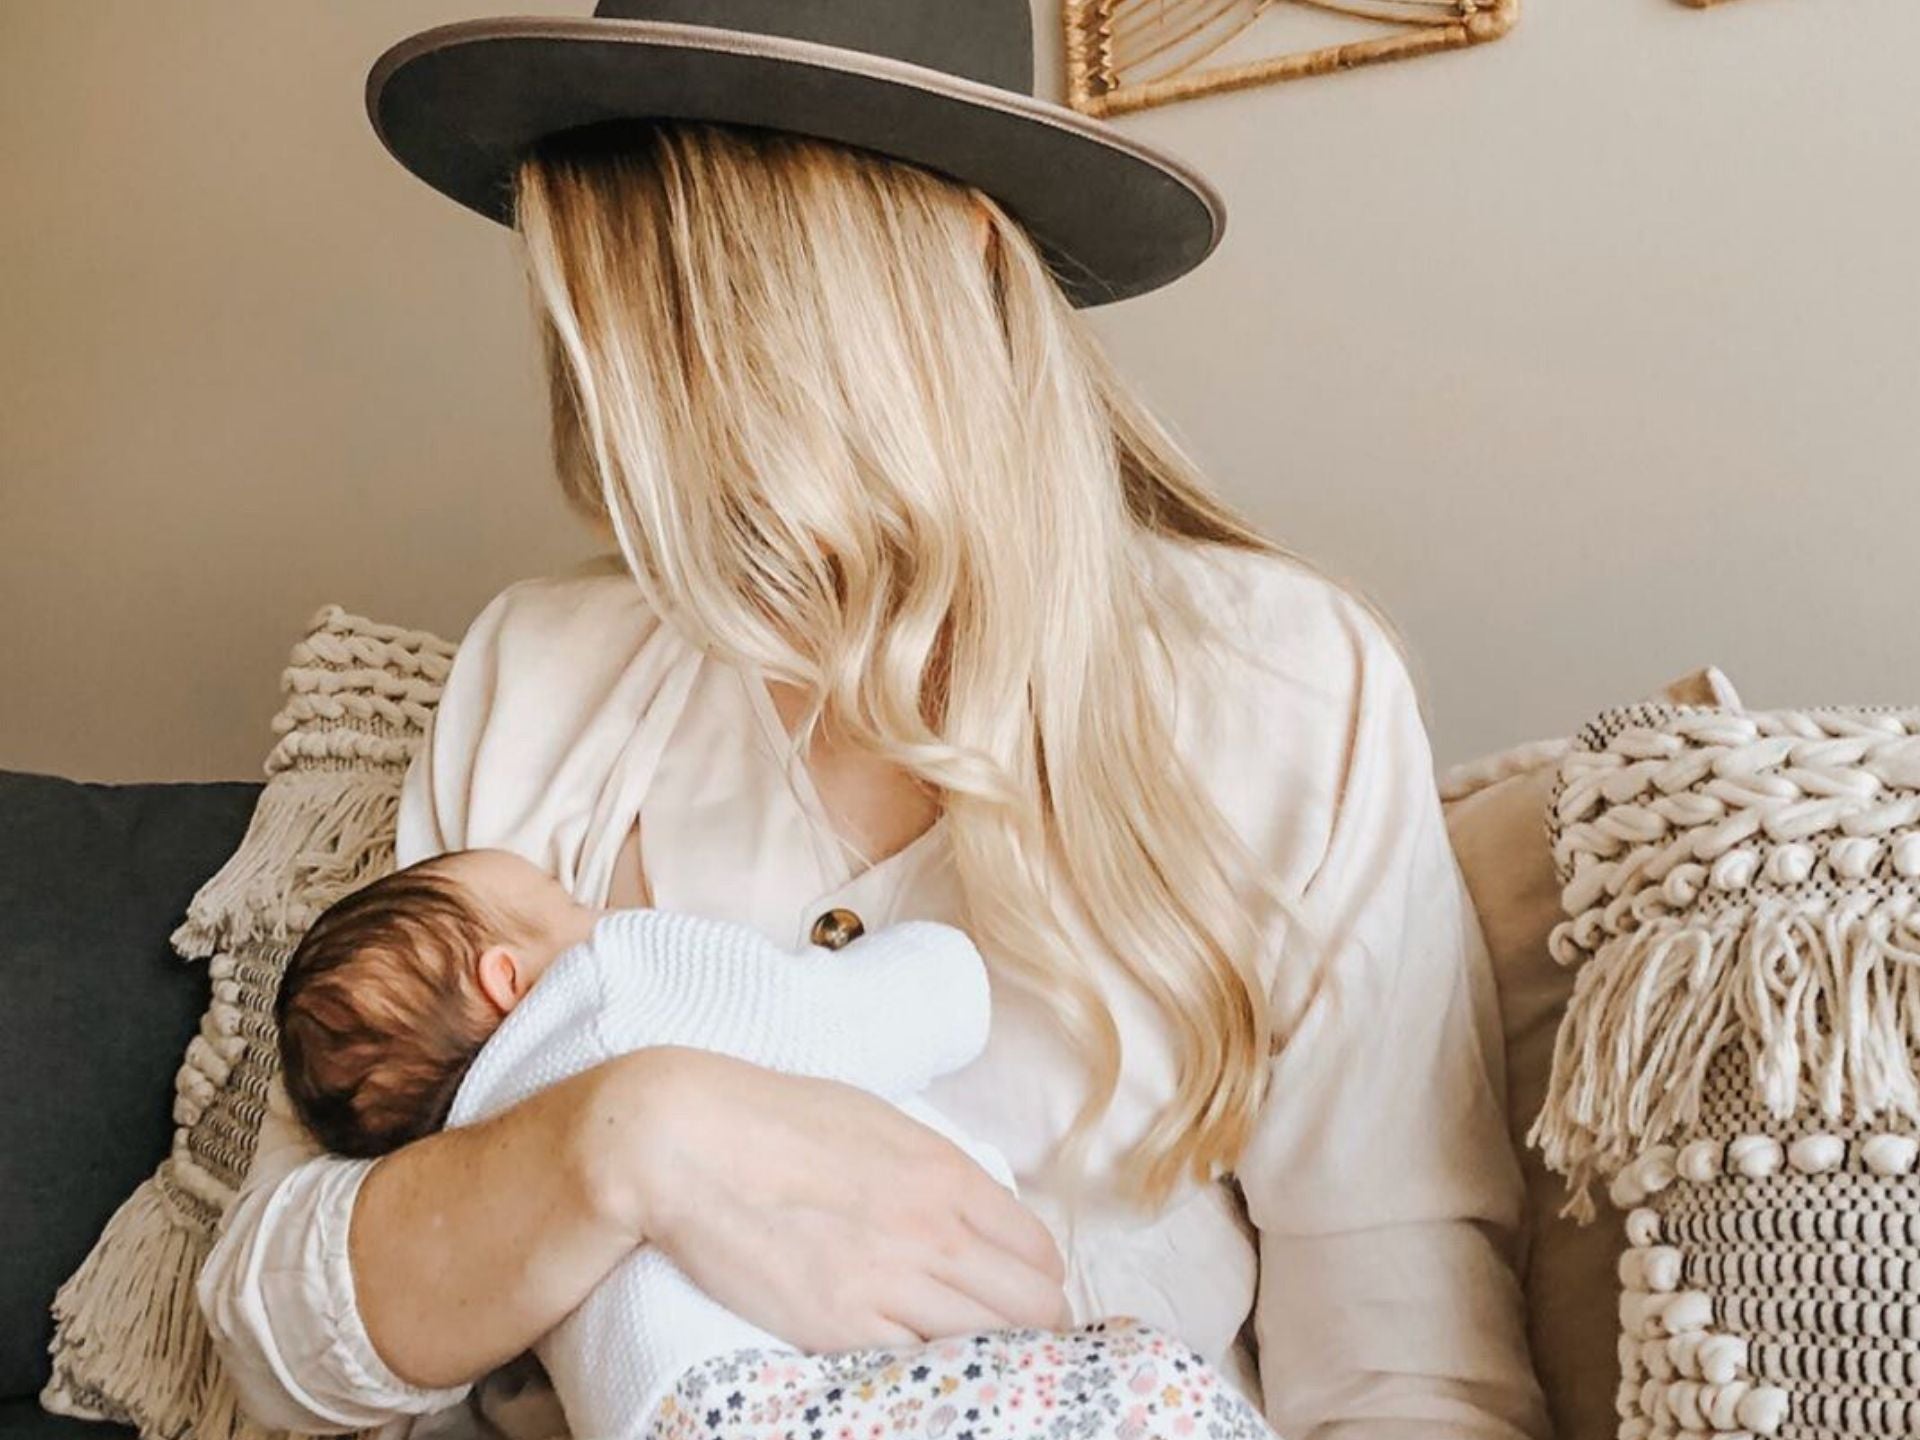 Postpartum Beauty - 7 Tips On How To Look Glamorous